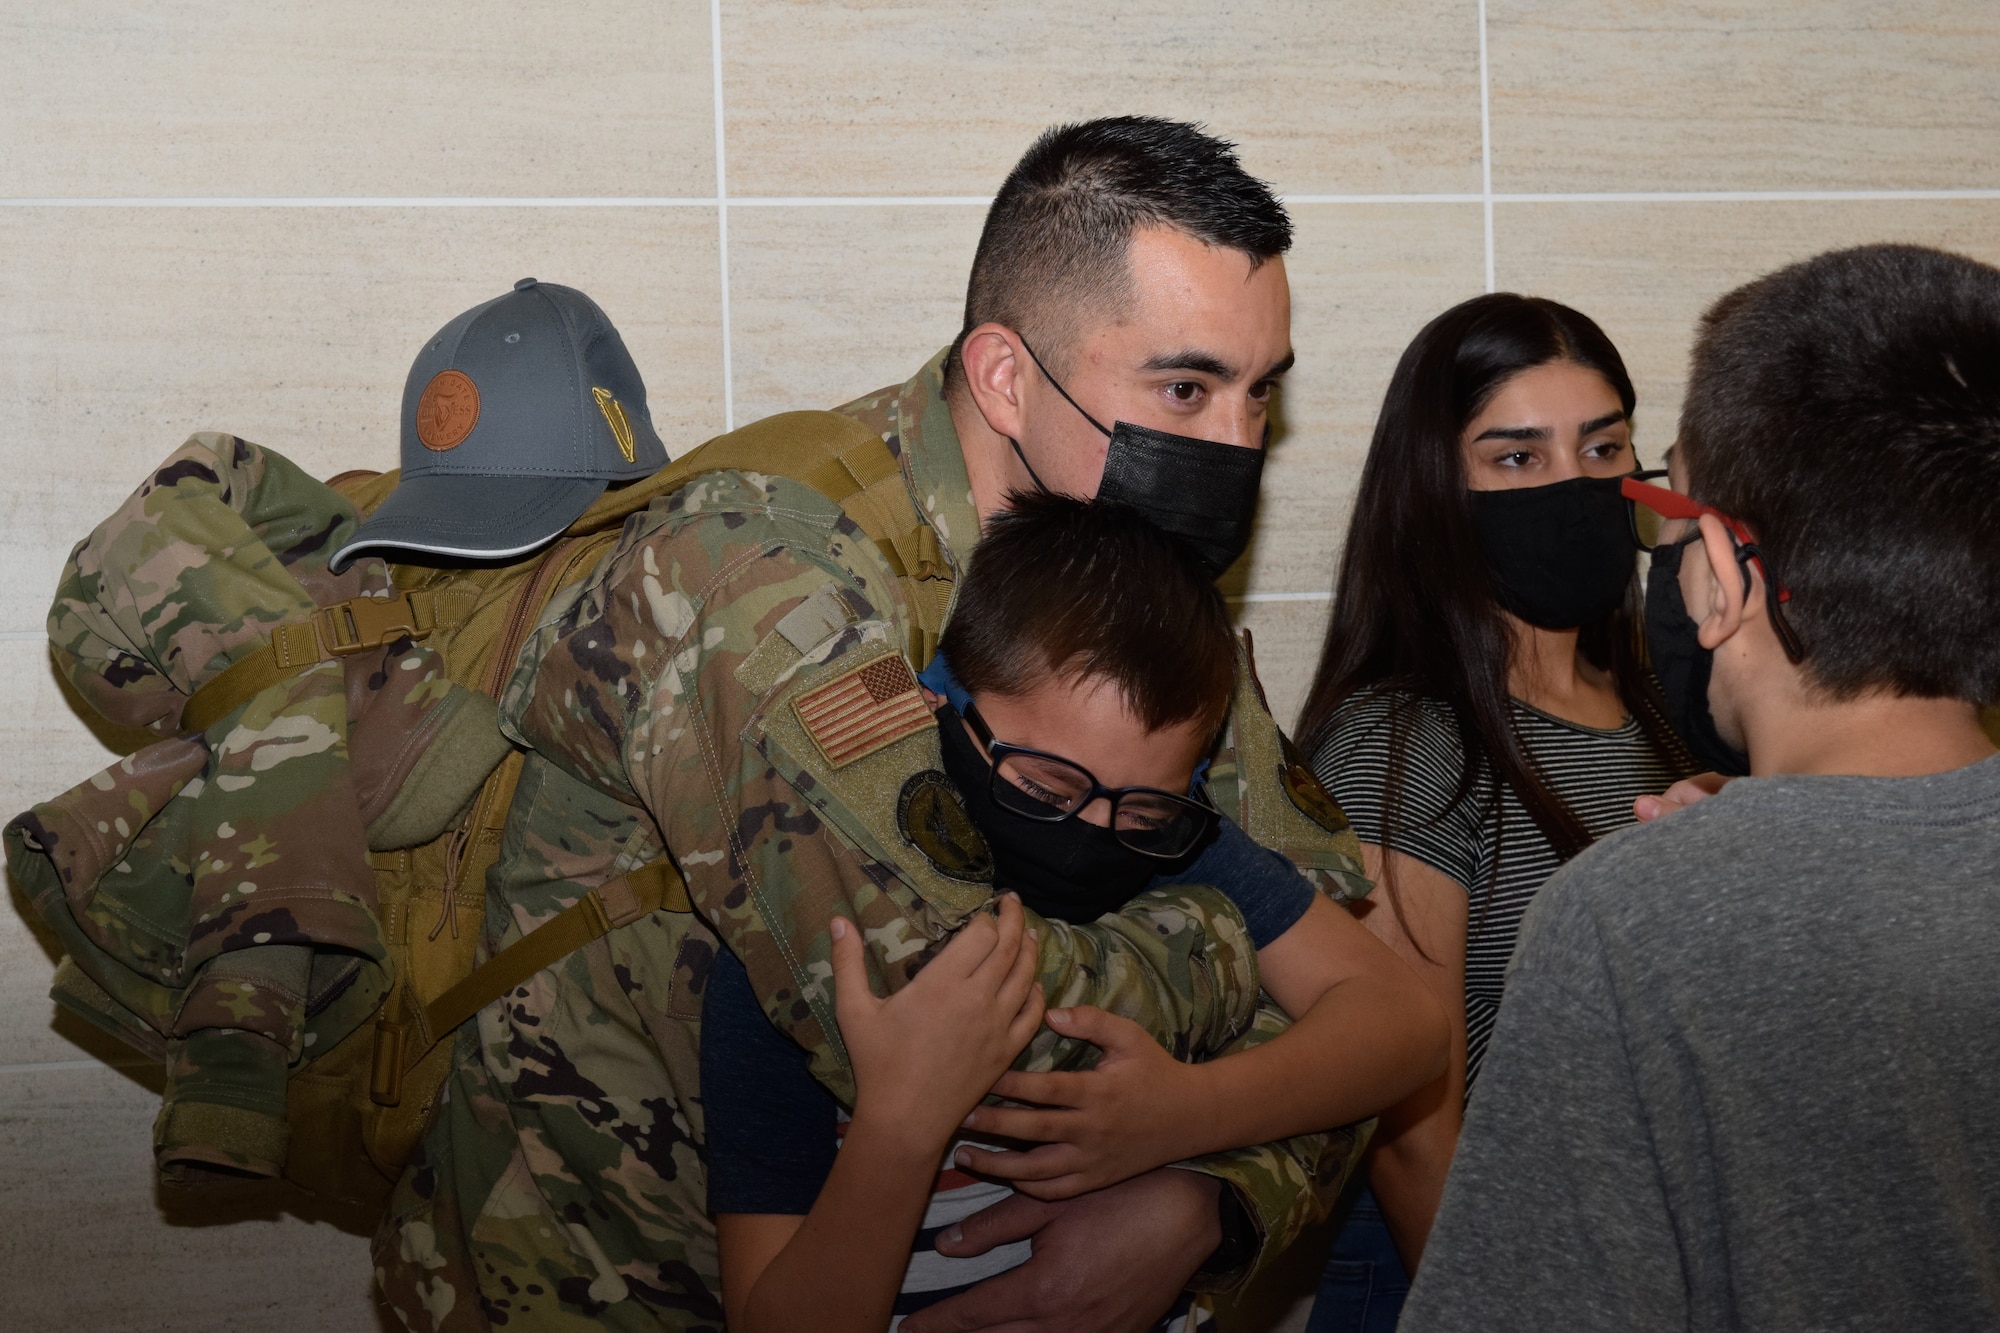 Tech. Sgt. Steven Redgate, 433rd Security Forces Squadron, reunites with his sons, Michael and Atom, and daughter, Desire Casillas, at the airport in San Antonio Jan. 31, 2021. Redgate has been with the 433rd SFS for 10 years and just completed his first deployment. (U.S. Air Force photo by Airman 1st Class Brittany Wich)